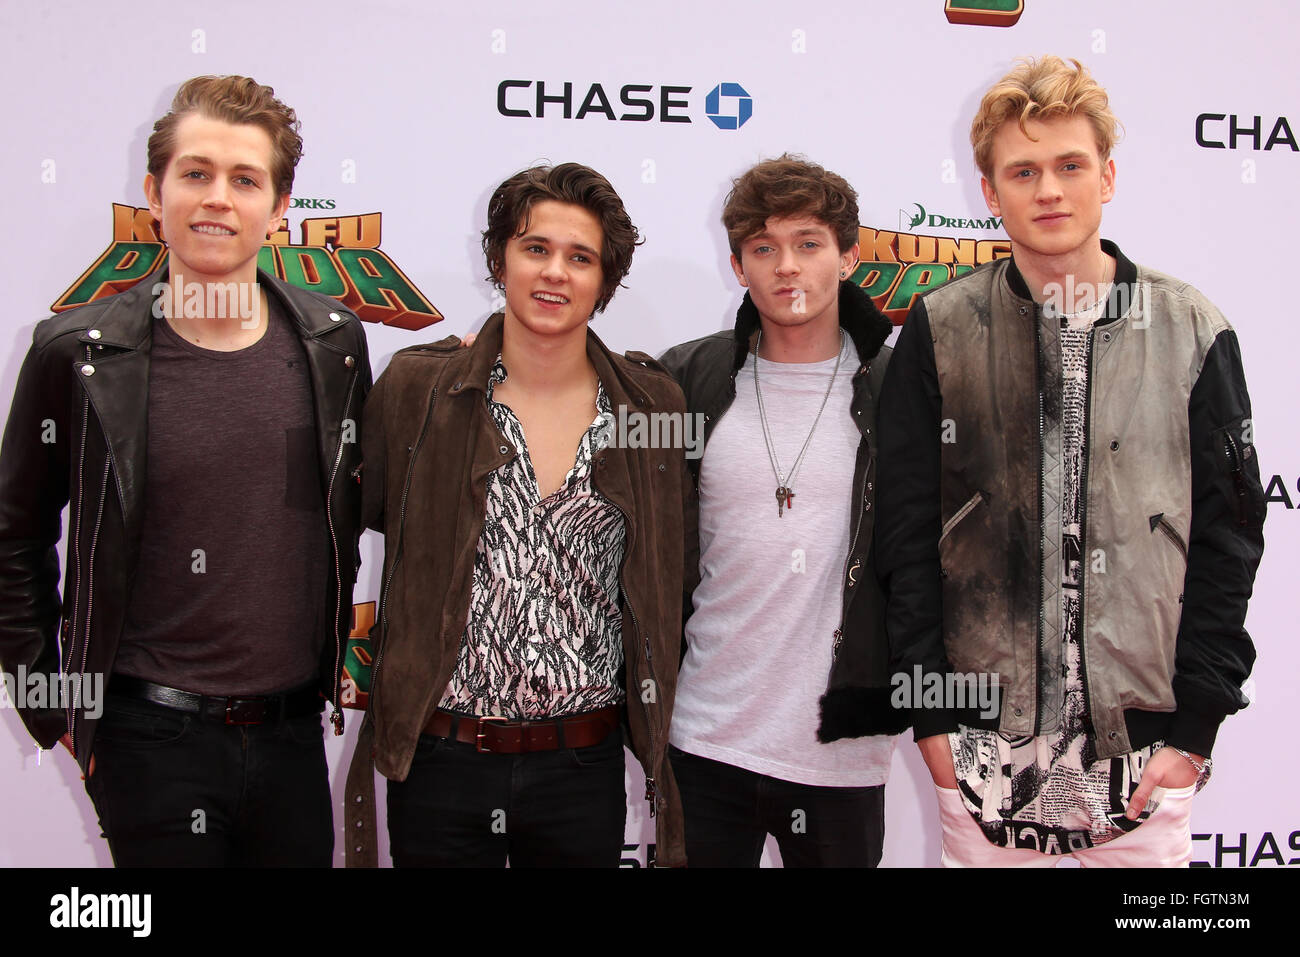 World premiere of 'Kung Fu Panda 3' - Arrivals  Featuring: Connor Ball, Tristan Evans, James McVey, Brad Simpson Where: Los Angeles, California, United States When: 16 Jan 2016 Stock Photo